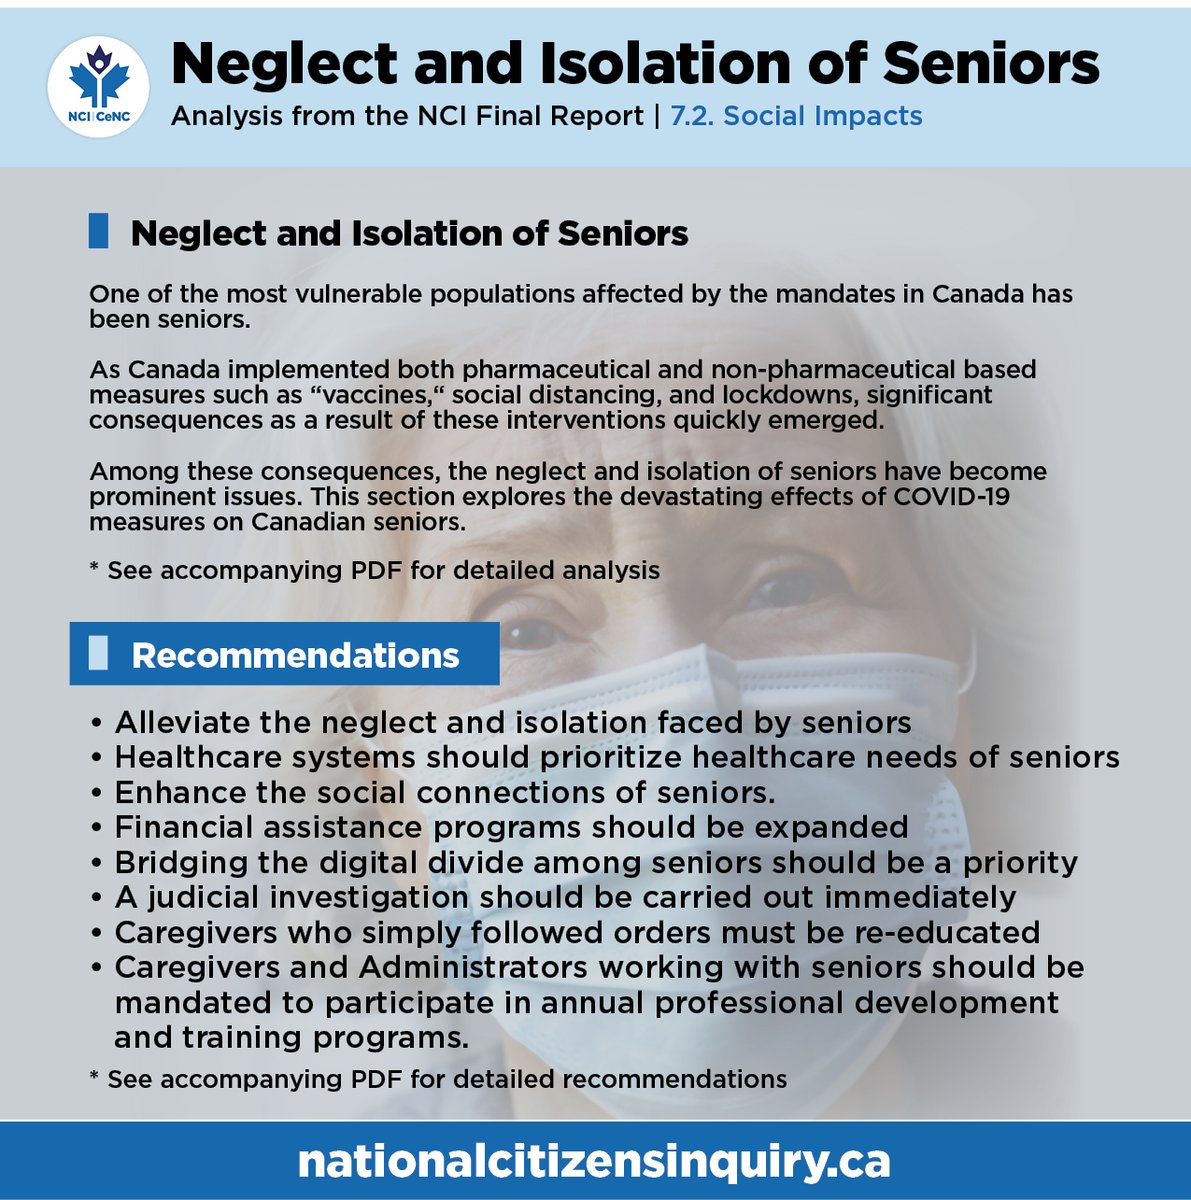 Social Impacts - Neglect and Isolation of Seniors : Highlights from the National Citizens Inquiry Final Commissioners Report - including Analysis and Recommendations. For more, visit nationalcitizensinquiry.ca/mini-reports/